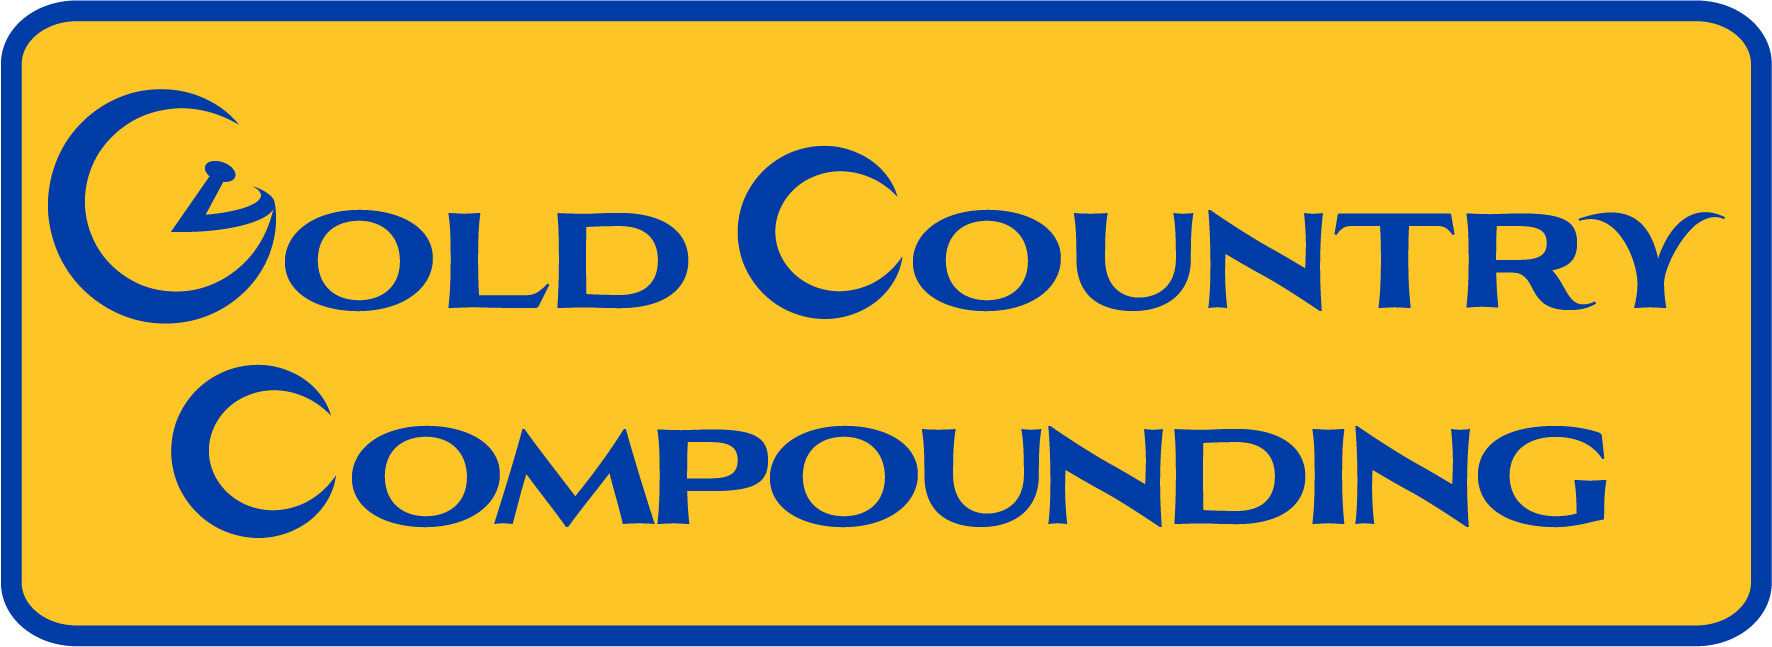 Gold Country Compounding